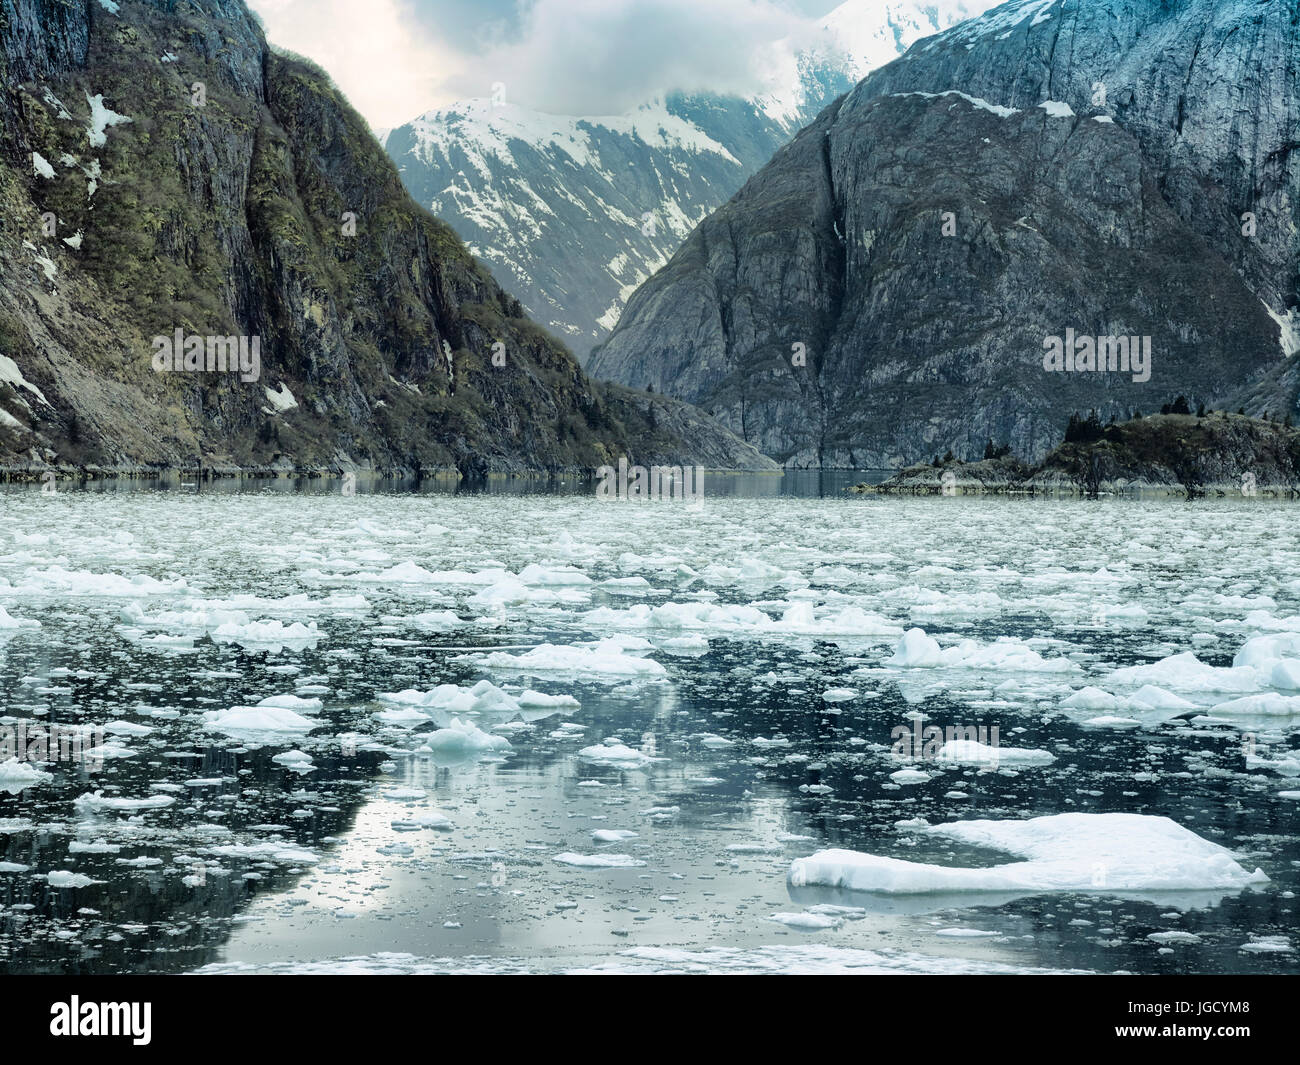 Scenic coastal landscape with steep glacially polished cliffs and floating ice at Tracy Arm Fjord, Alaska Stock Photo